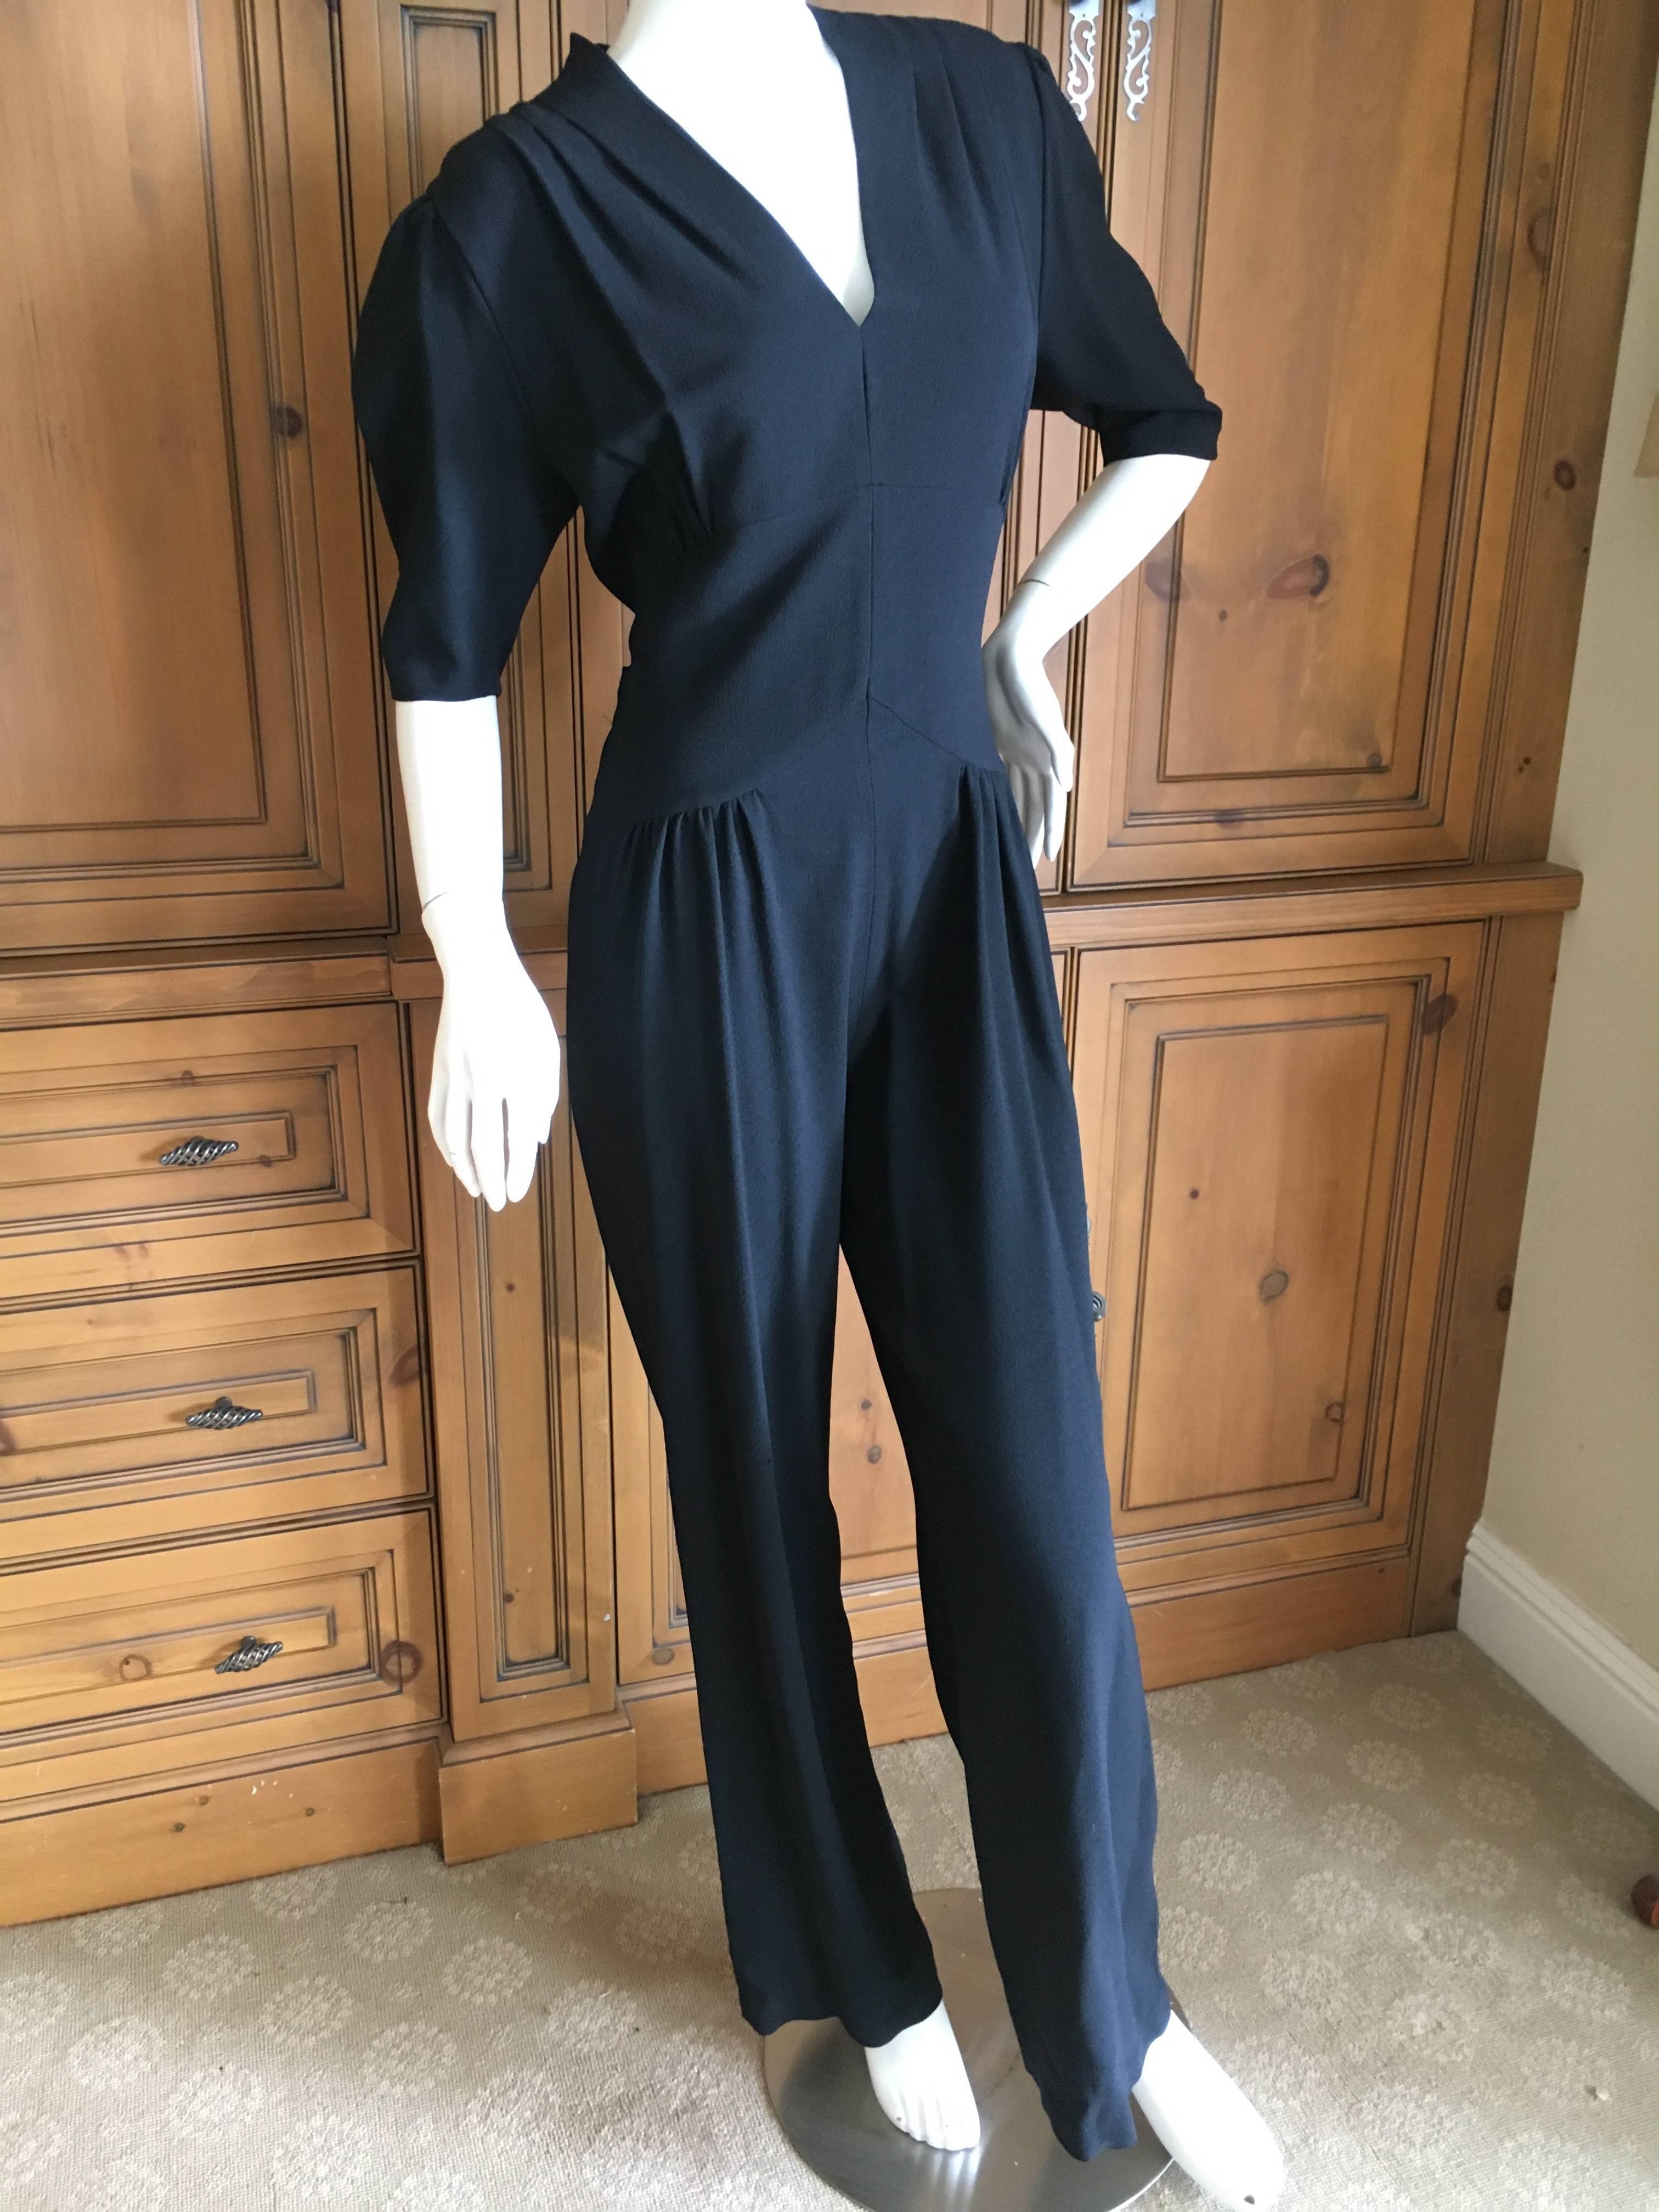 Norma Kamali Vintage Black Crepe 1930's Style Jumpsuit.
Size 40
Made in Italy circa 1985
Bust 38